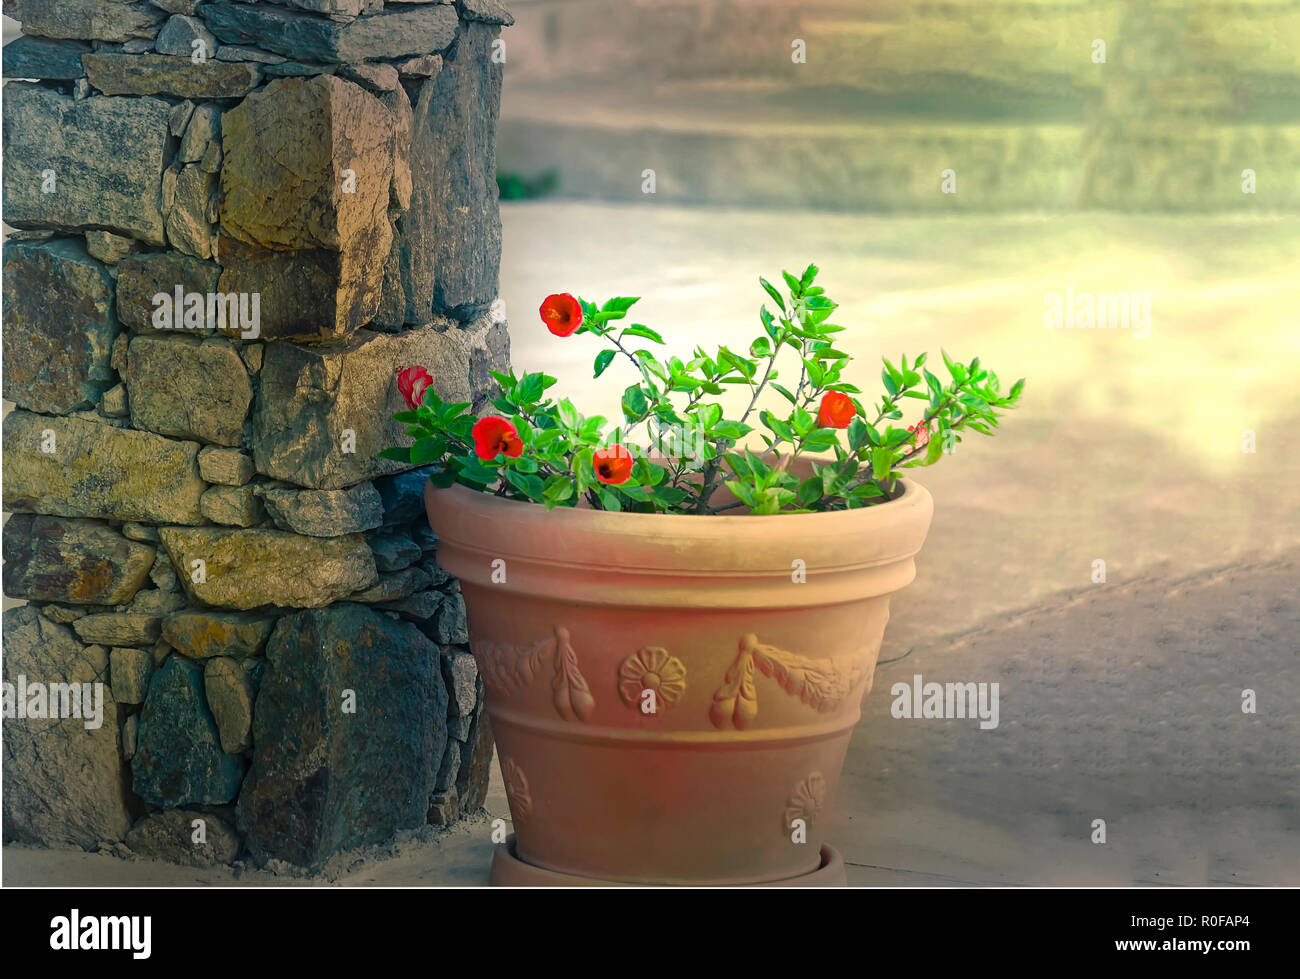 A ceramic pot with  red Hibiscus flowers in bloom.  Stock Image. Stock Photo